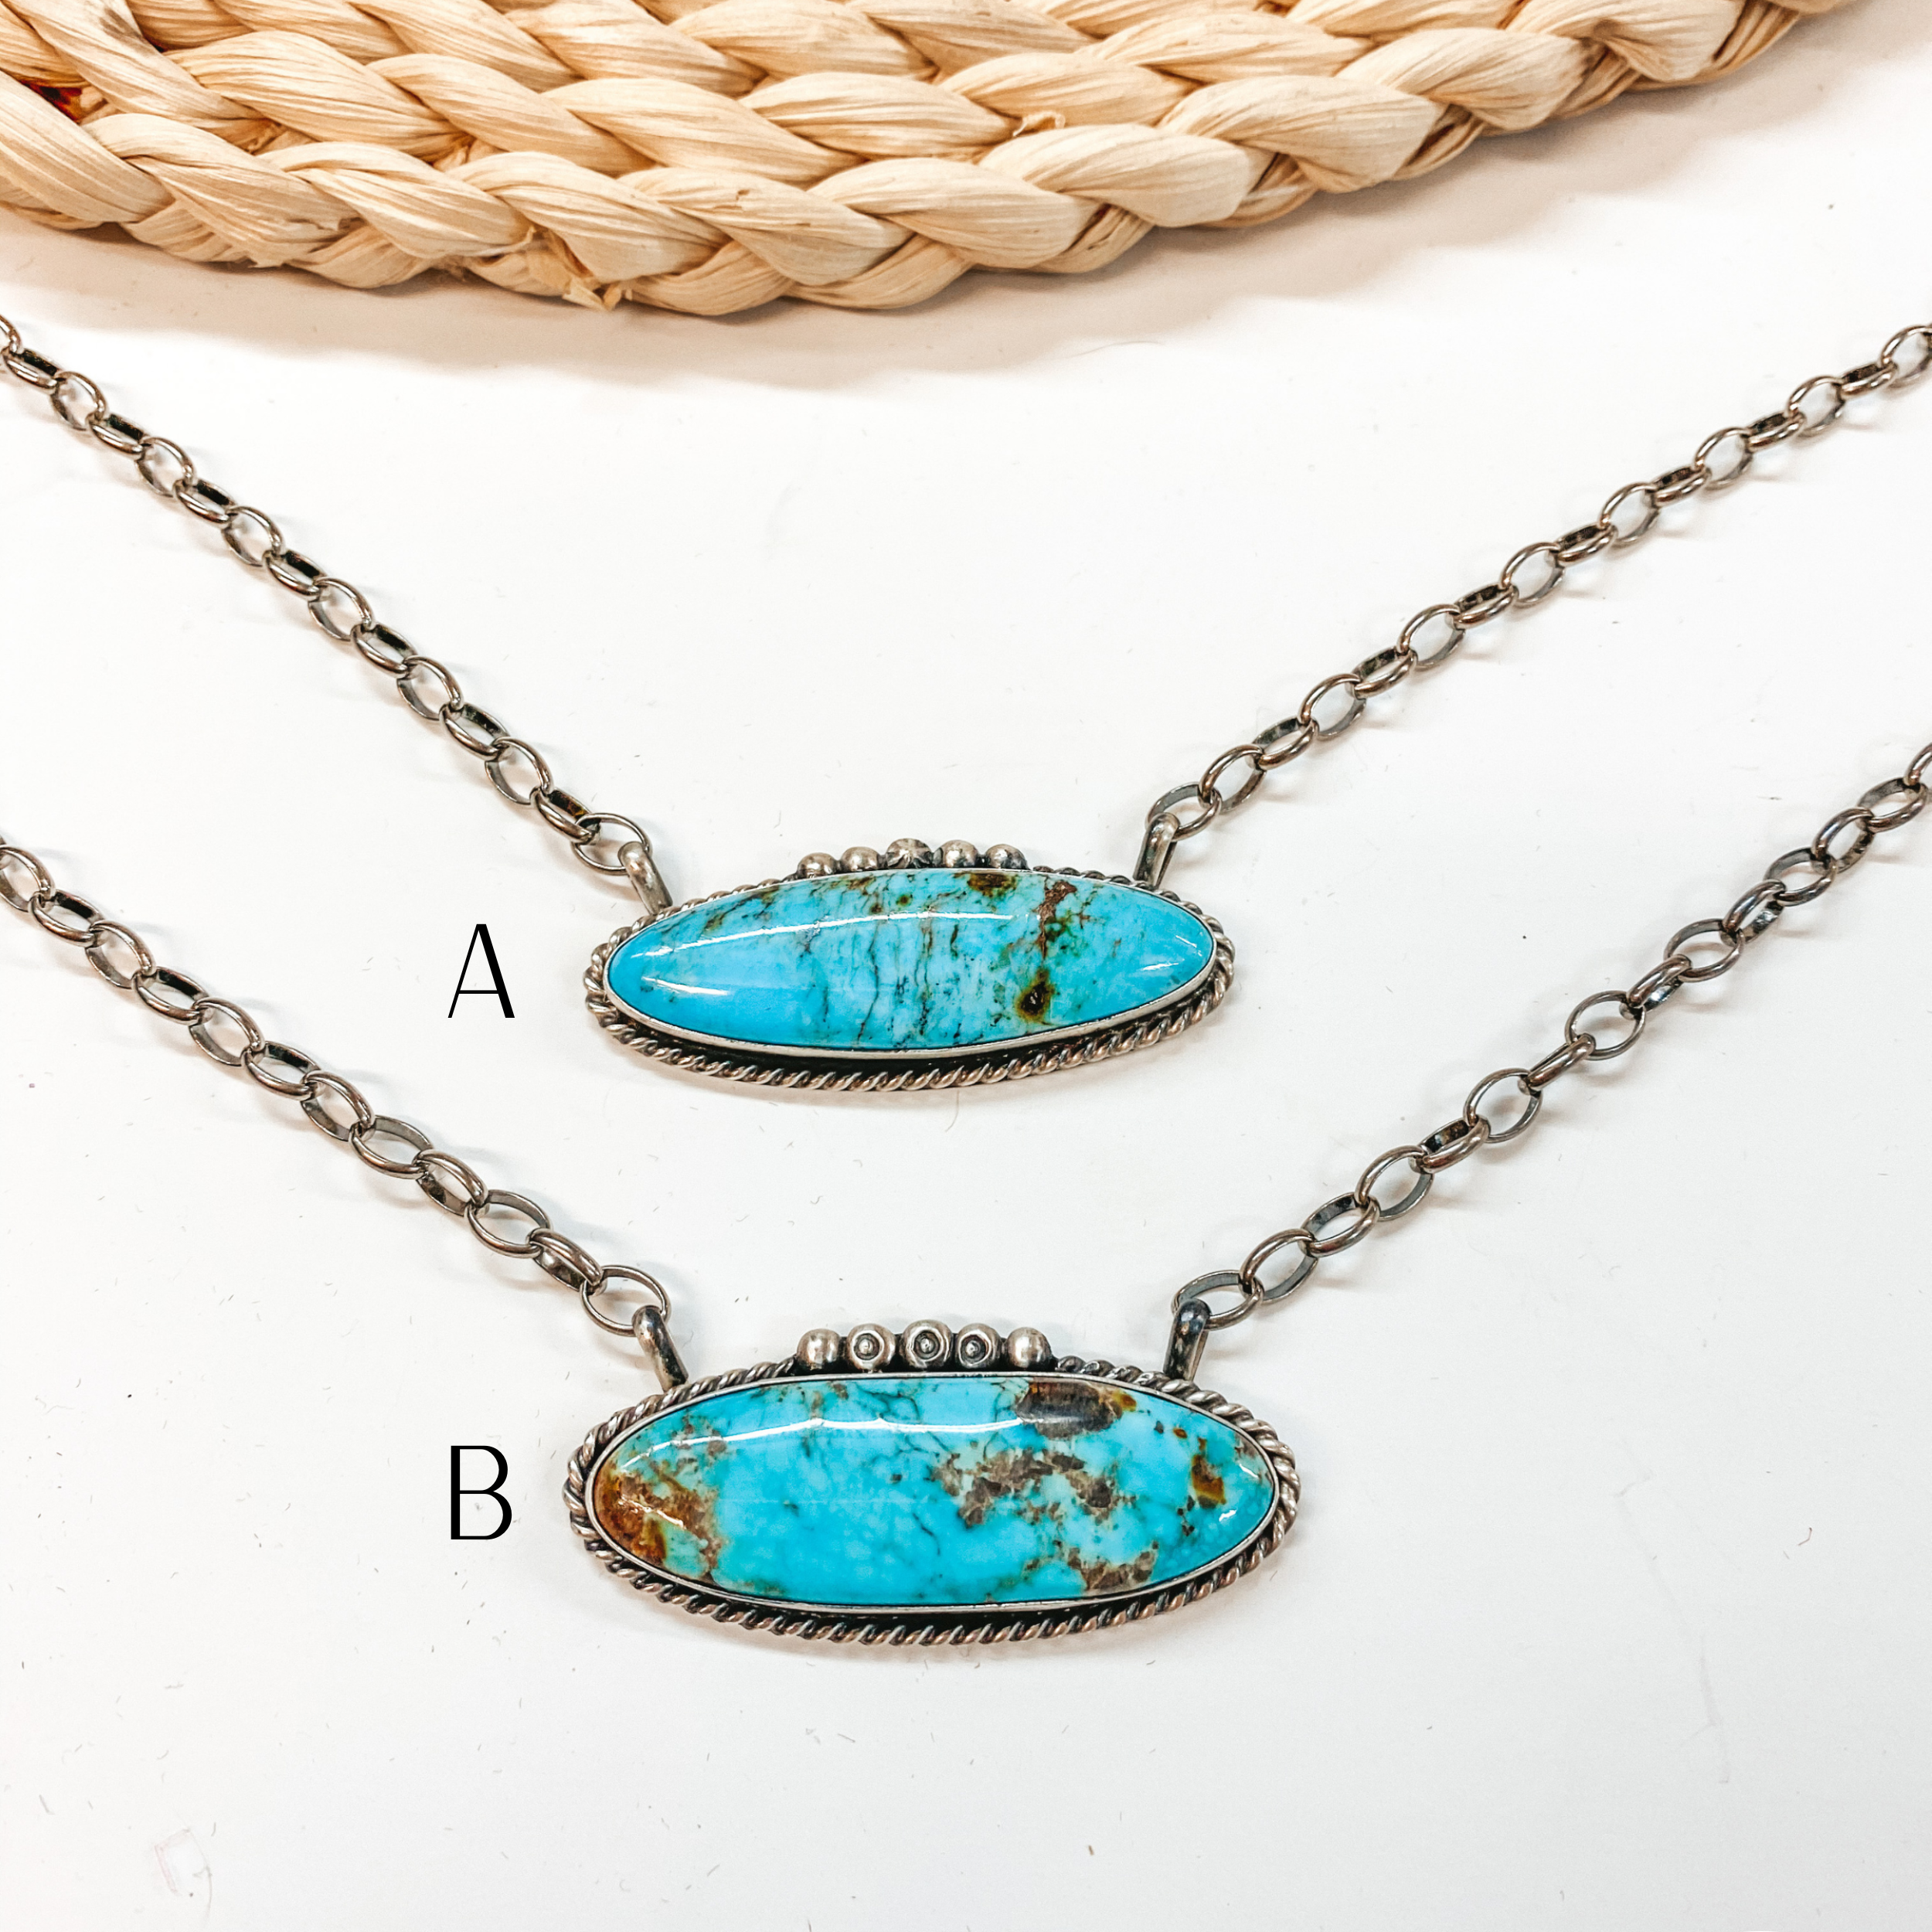 Augustine Largo | Navajo Handmade Sterling Silver Chain Necklace with Silverwork and Large Oval Kingman Turquoise Pendant - Giddy Up Glamour Boutique